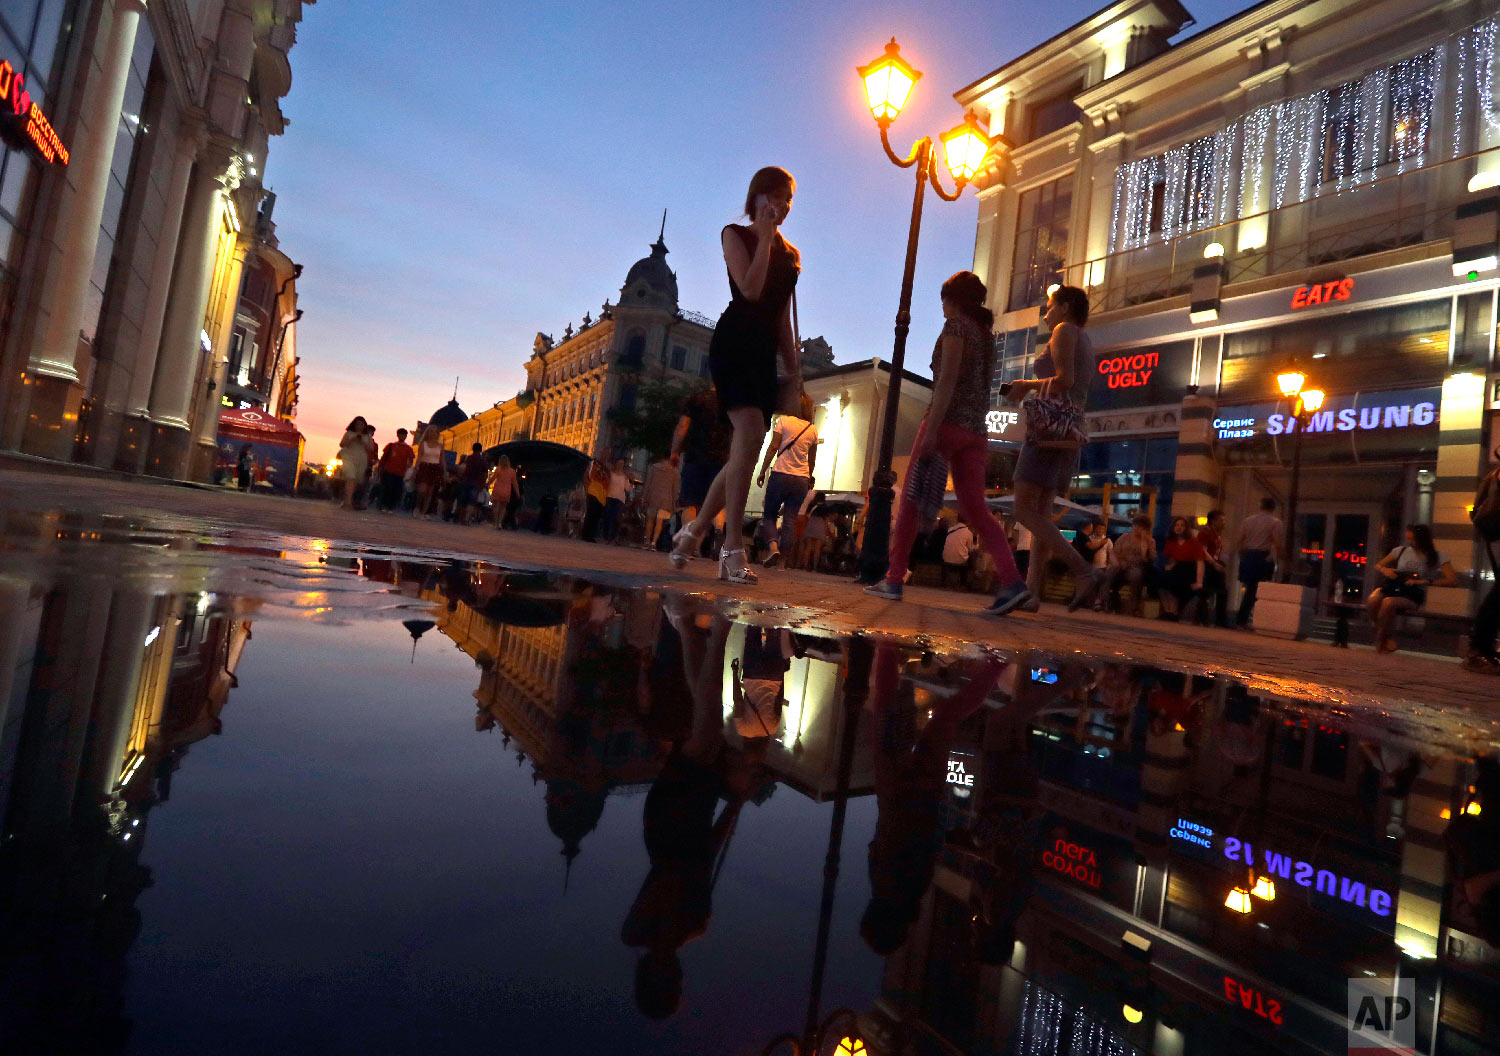  People walk at sunset during the 2018 soccer World Cup in downtown Kazan, Russia on June 26, 2018. (AP Photo/Sergei Grits) 